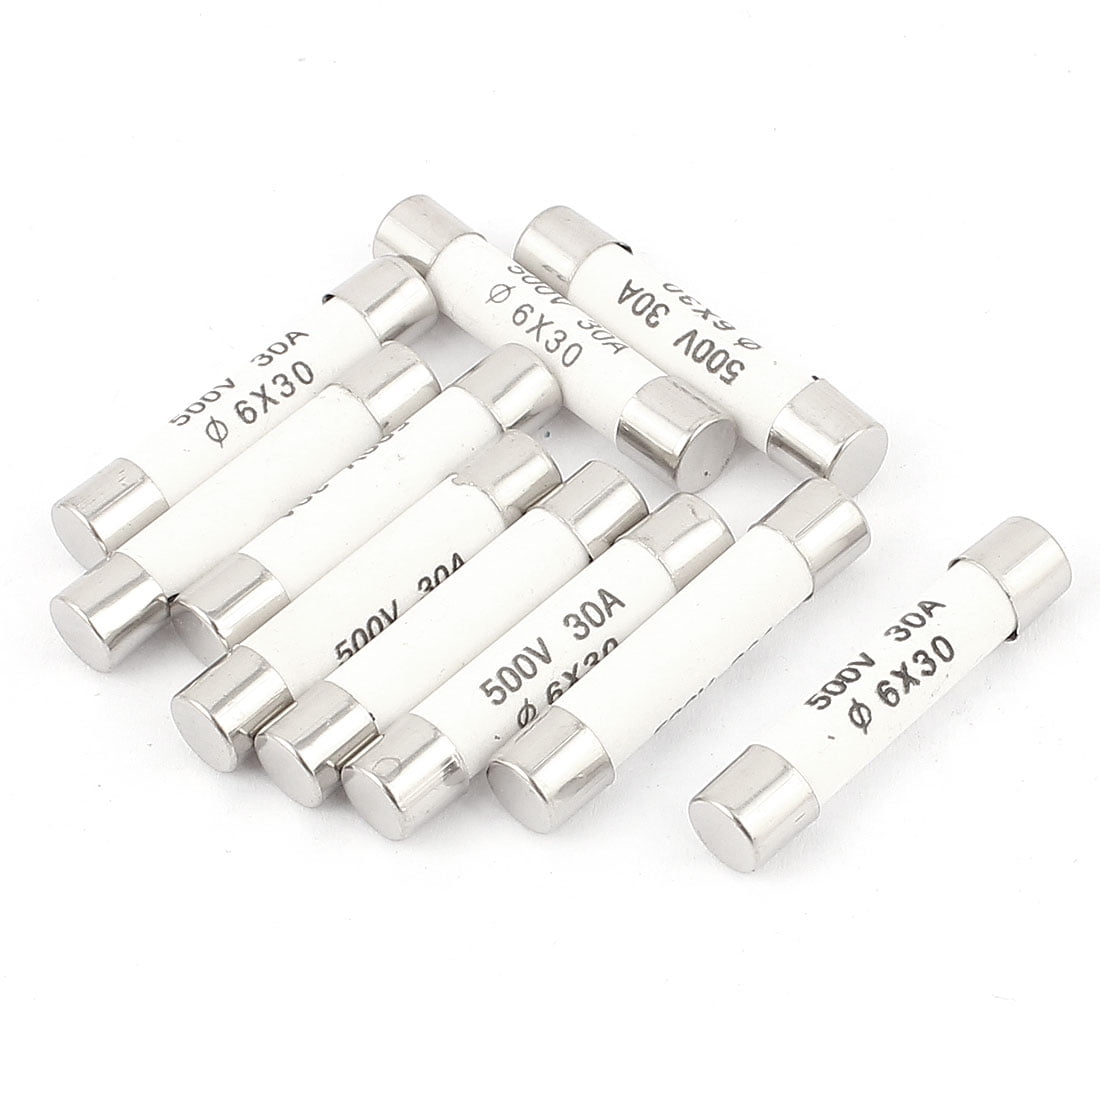 PACK OF 10PK 3A AMP GLASS FUSES FUSE CAR AUTO VAN BOAT MARINE 29 x 6mm 